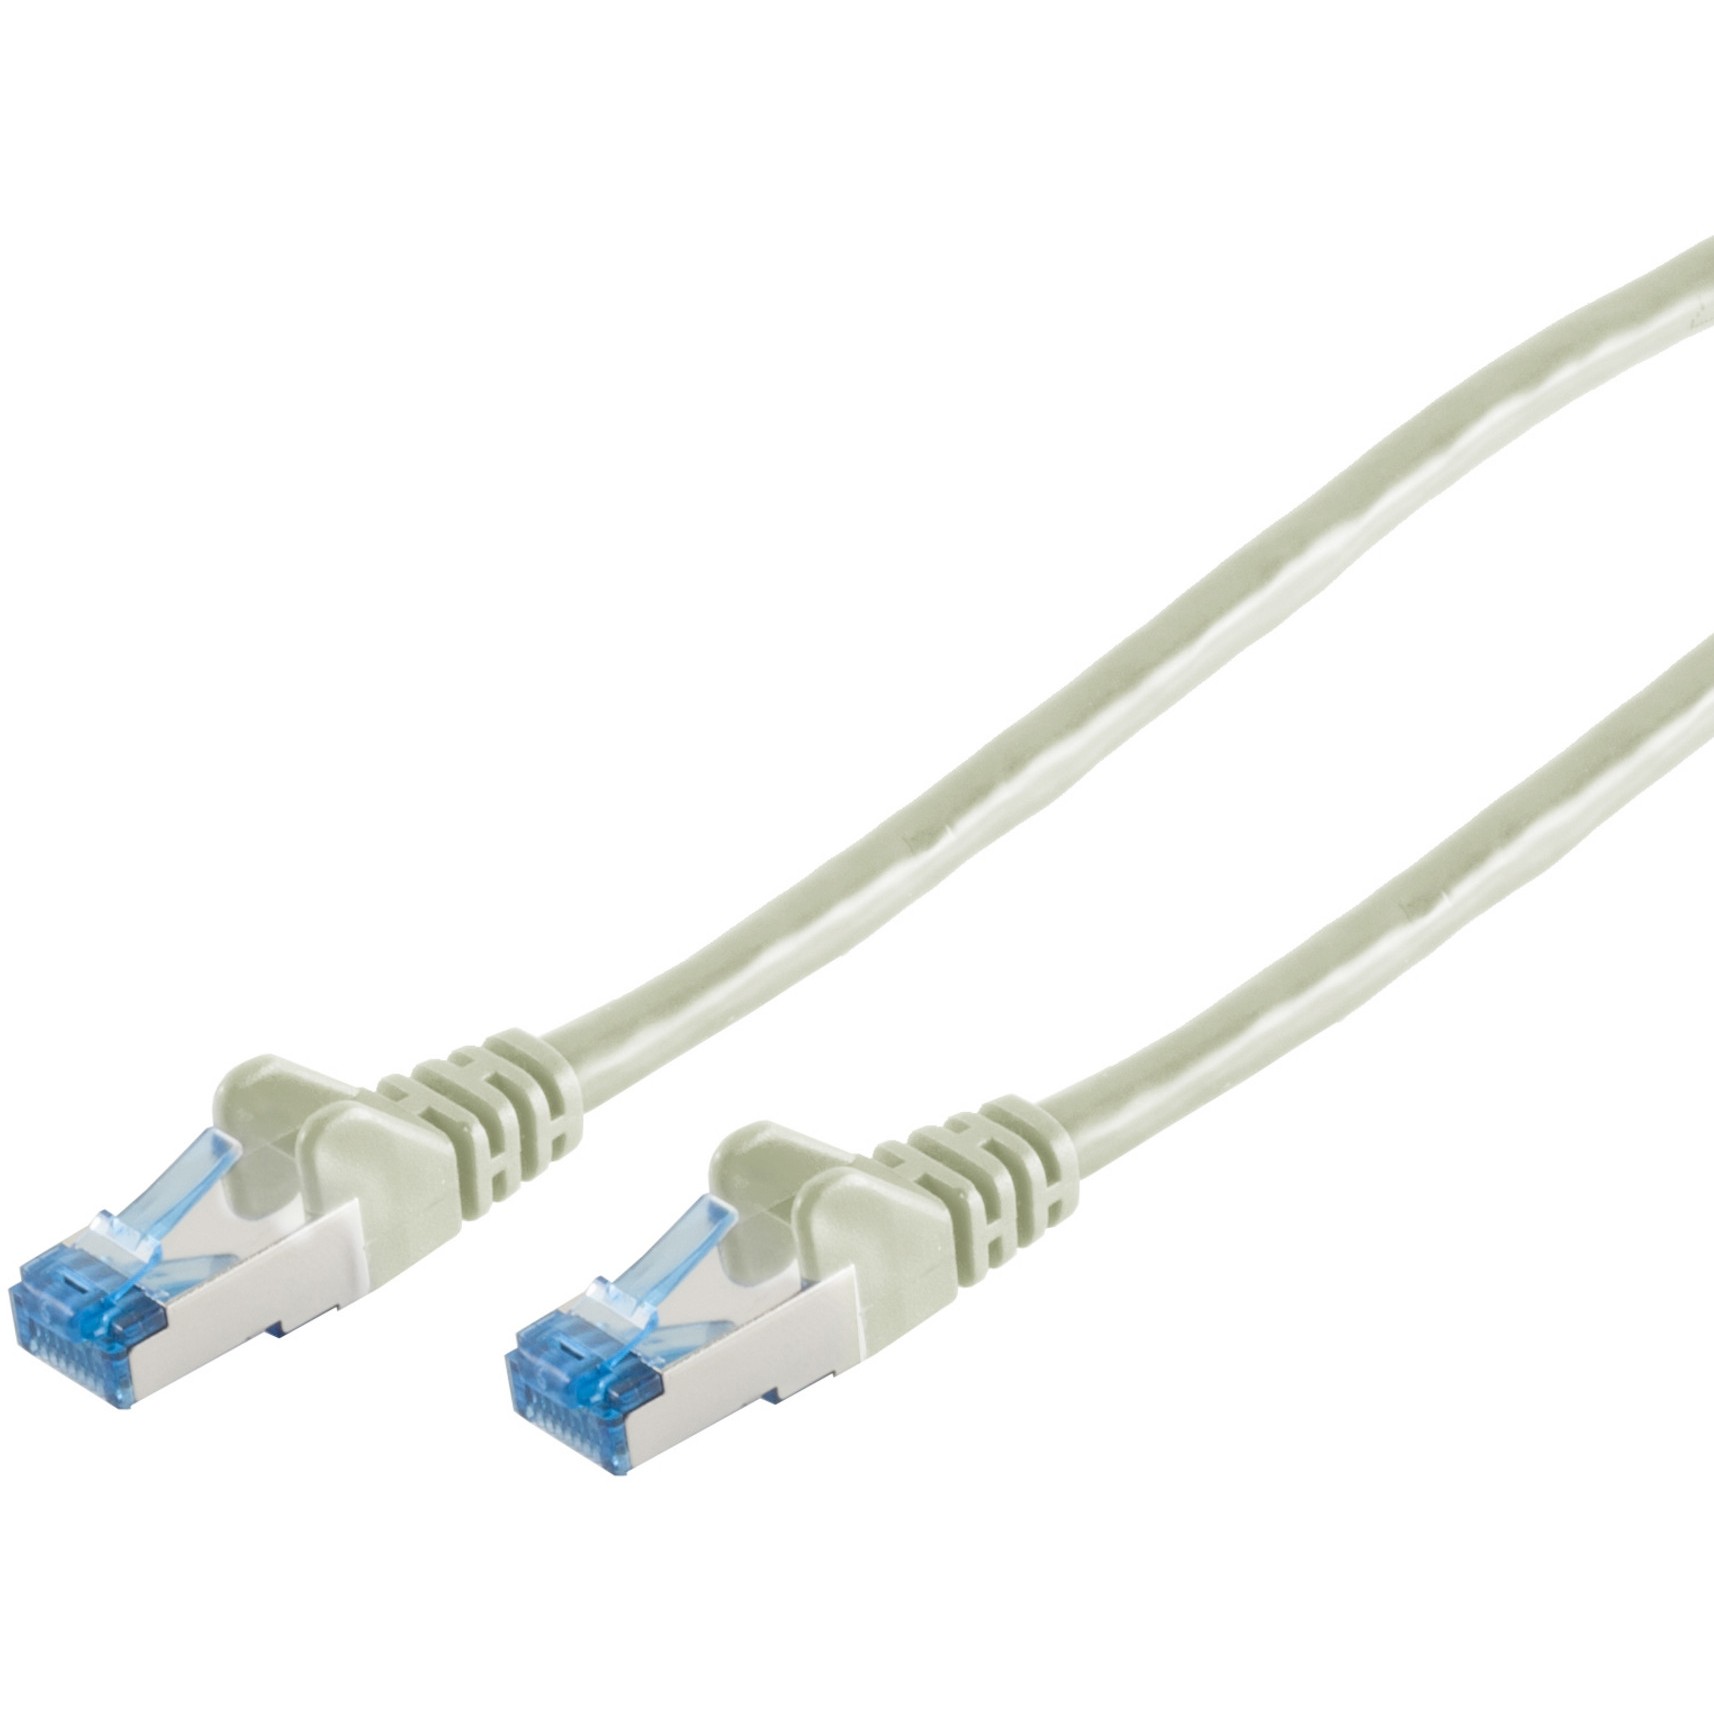 S-Conn 75725 networking cable - 75725